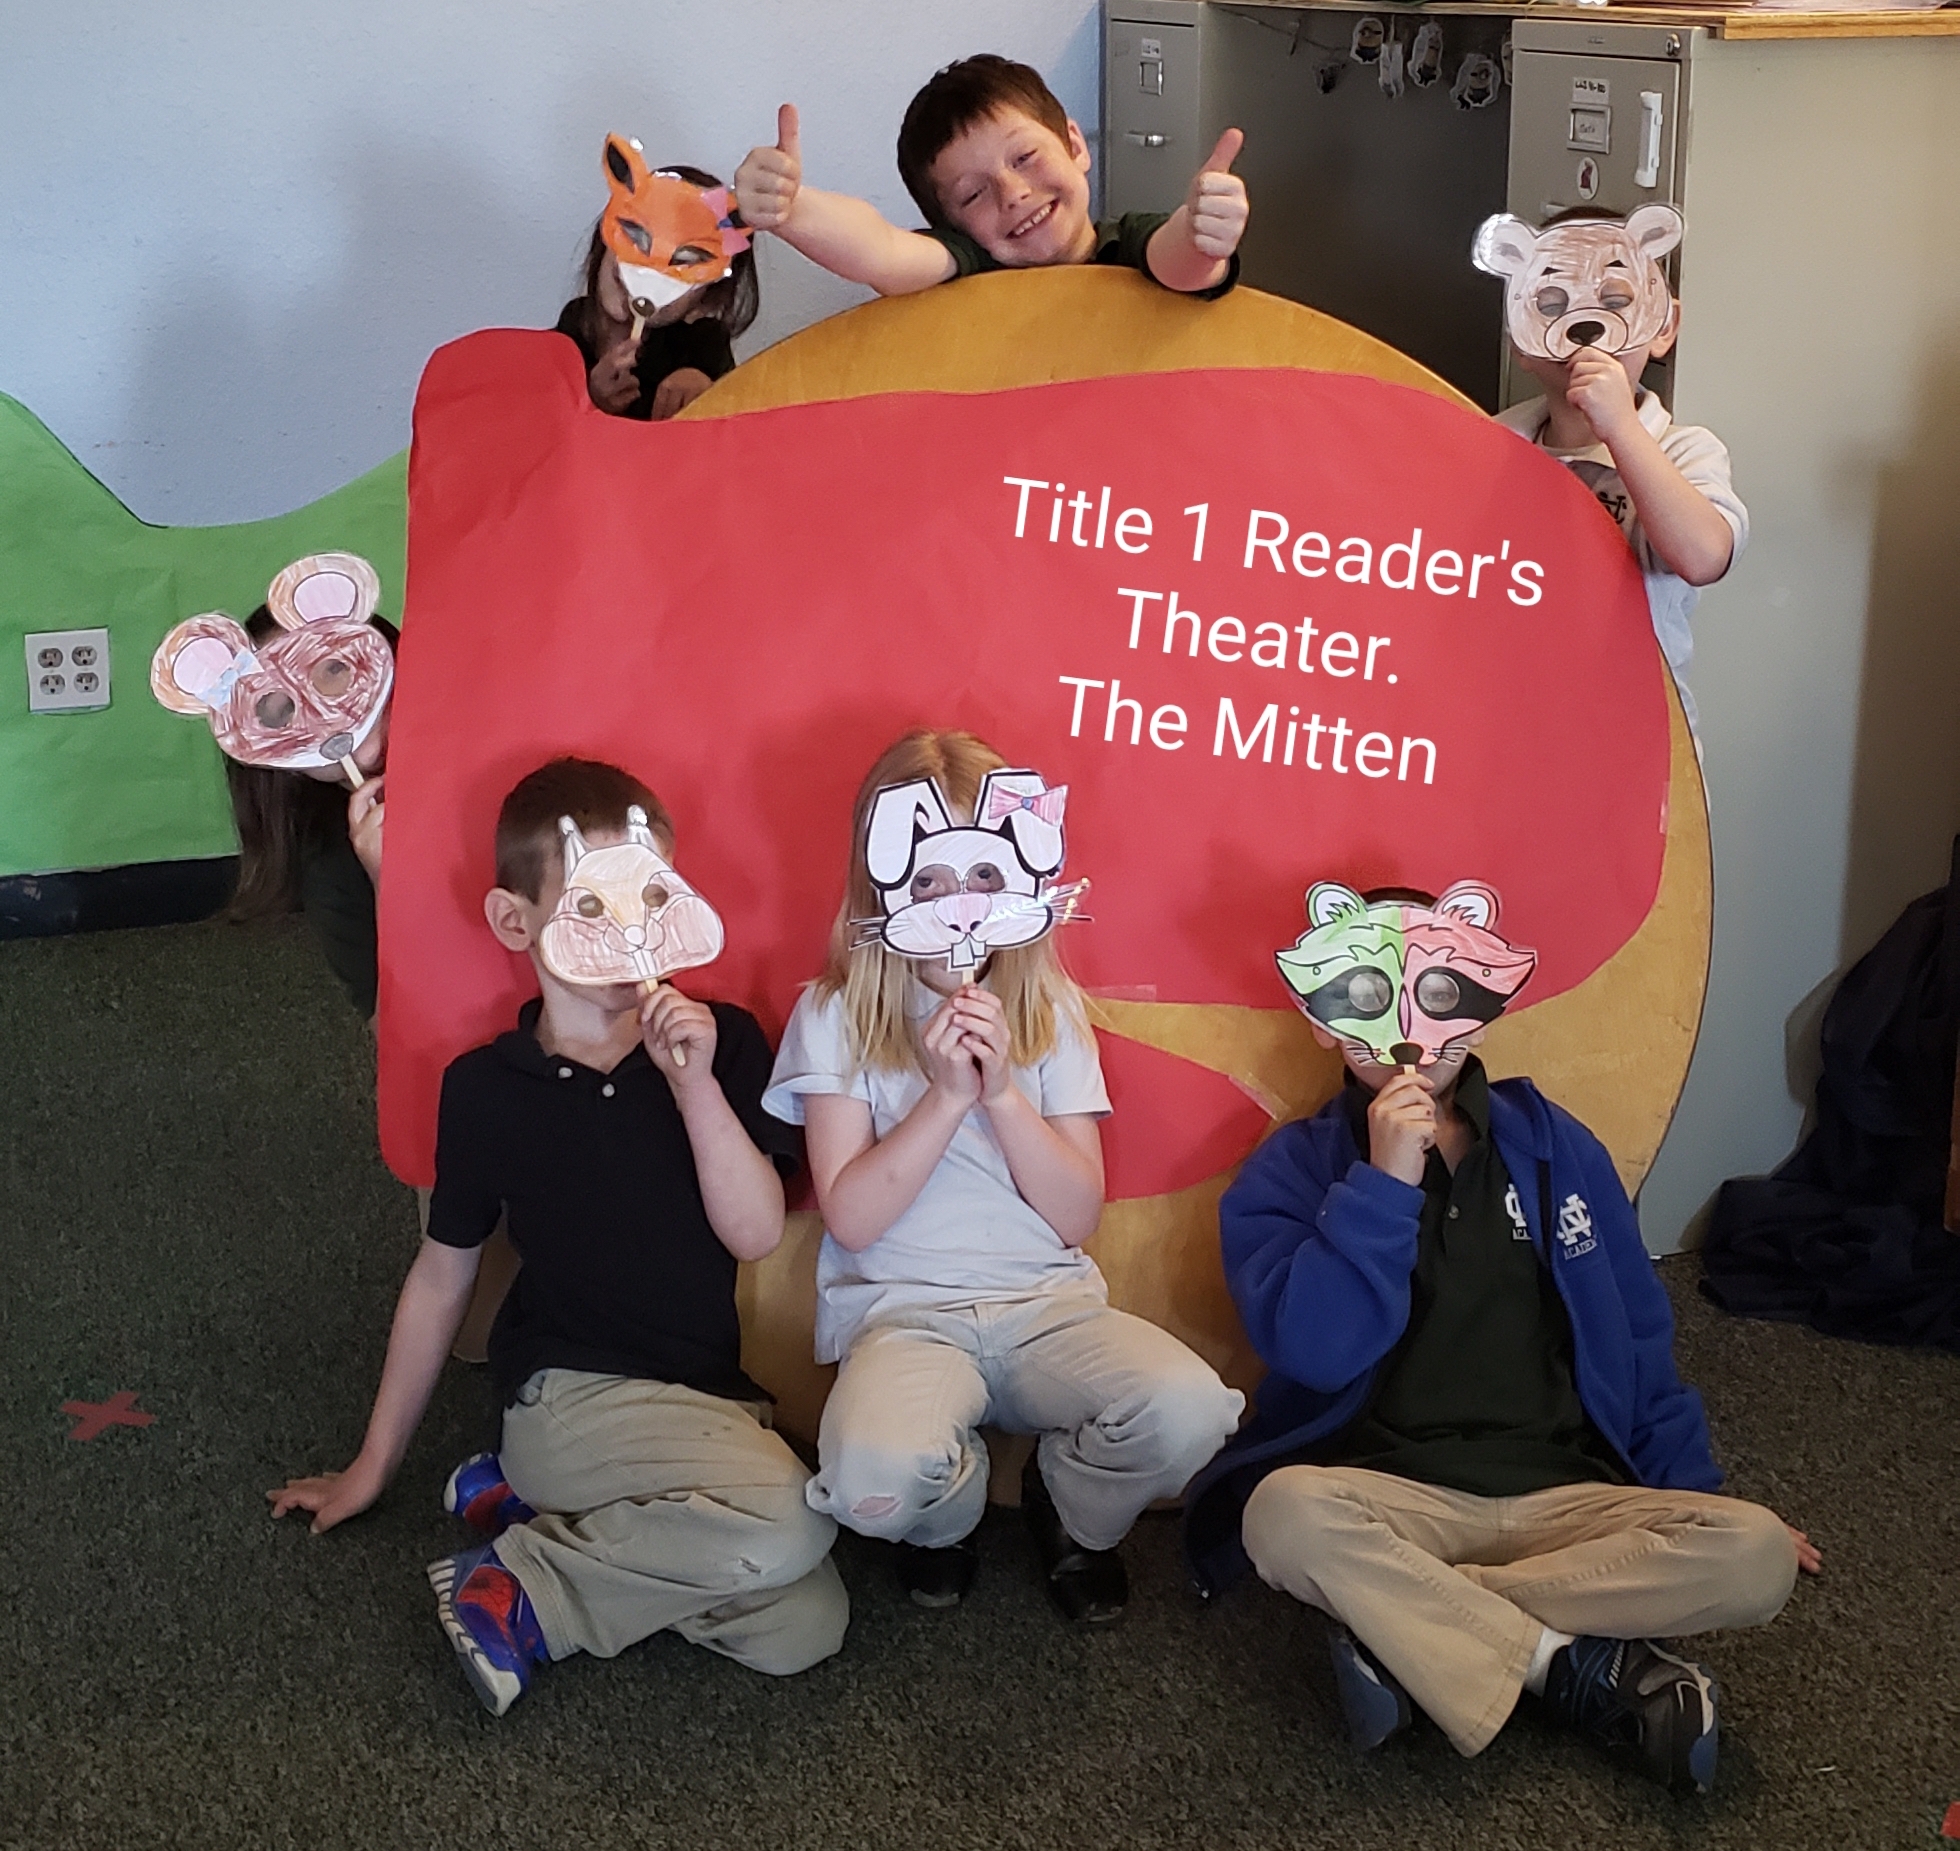 The cast of the reader theater with their finished masks